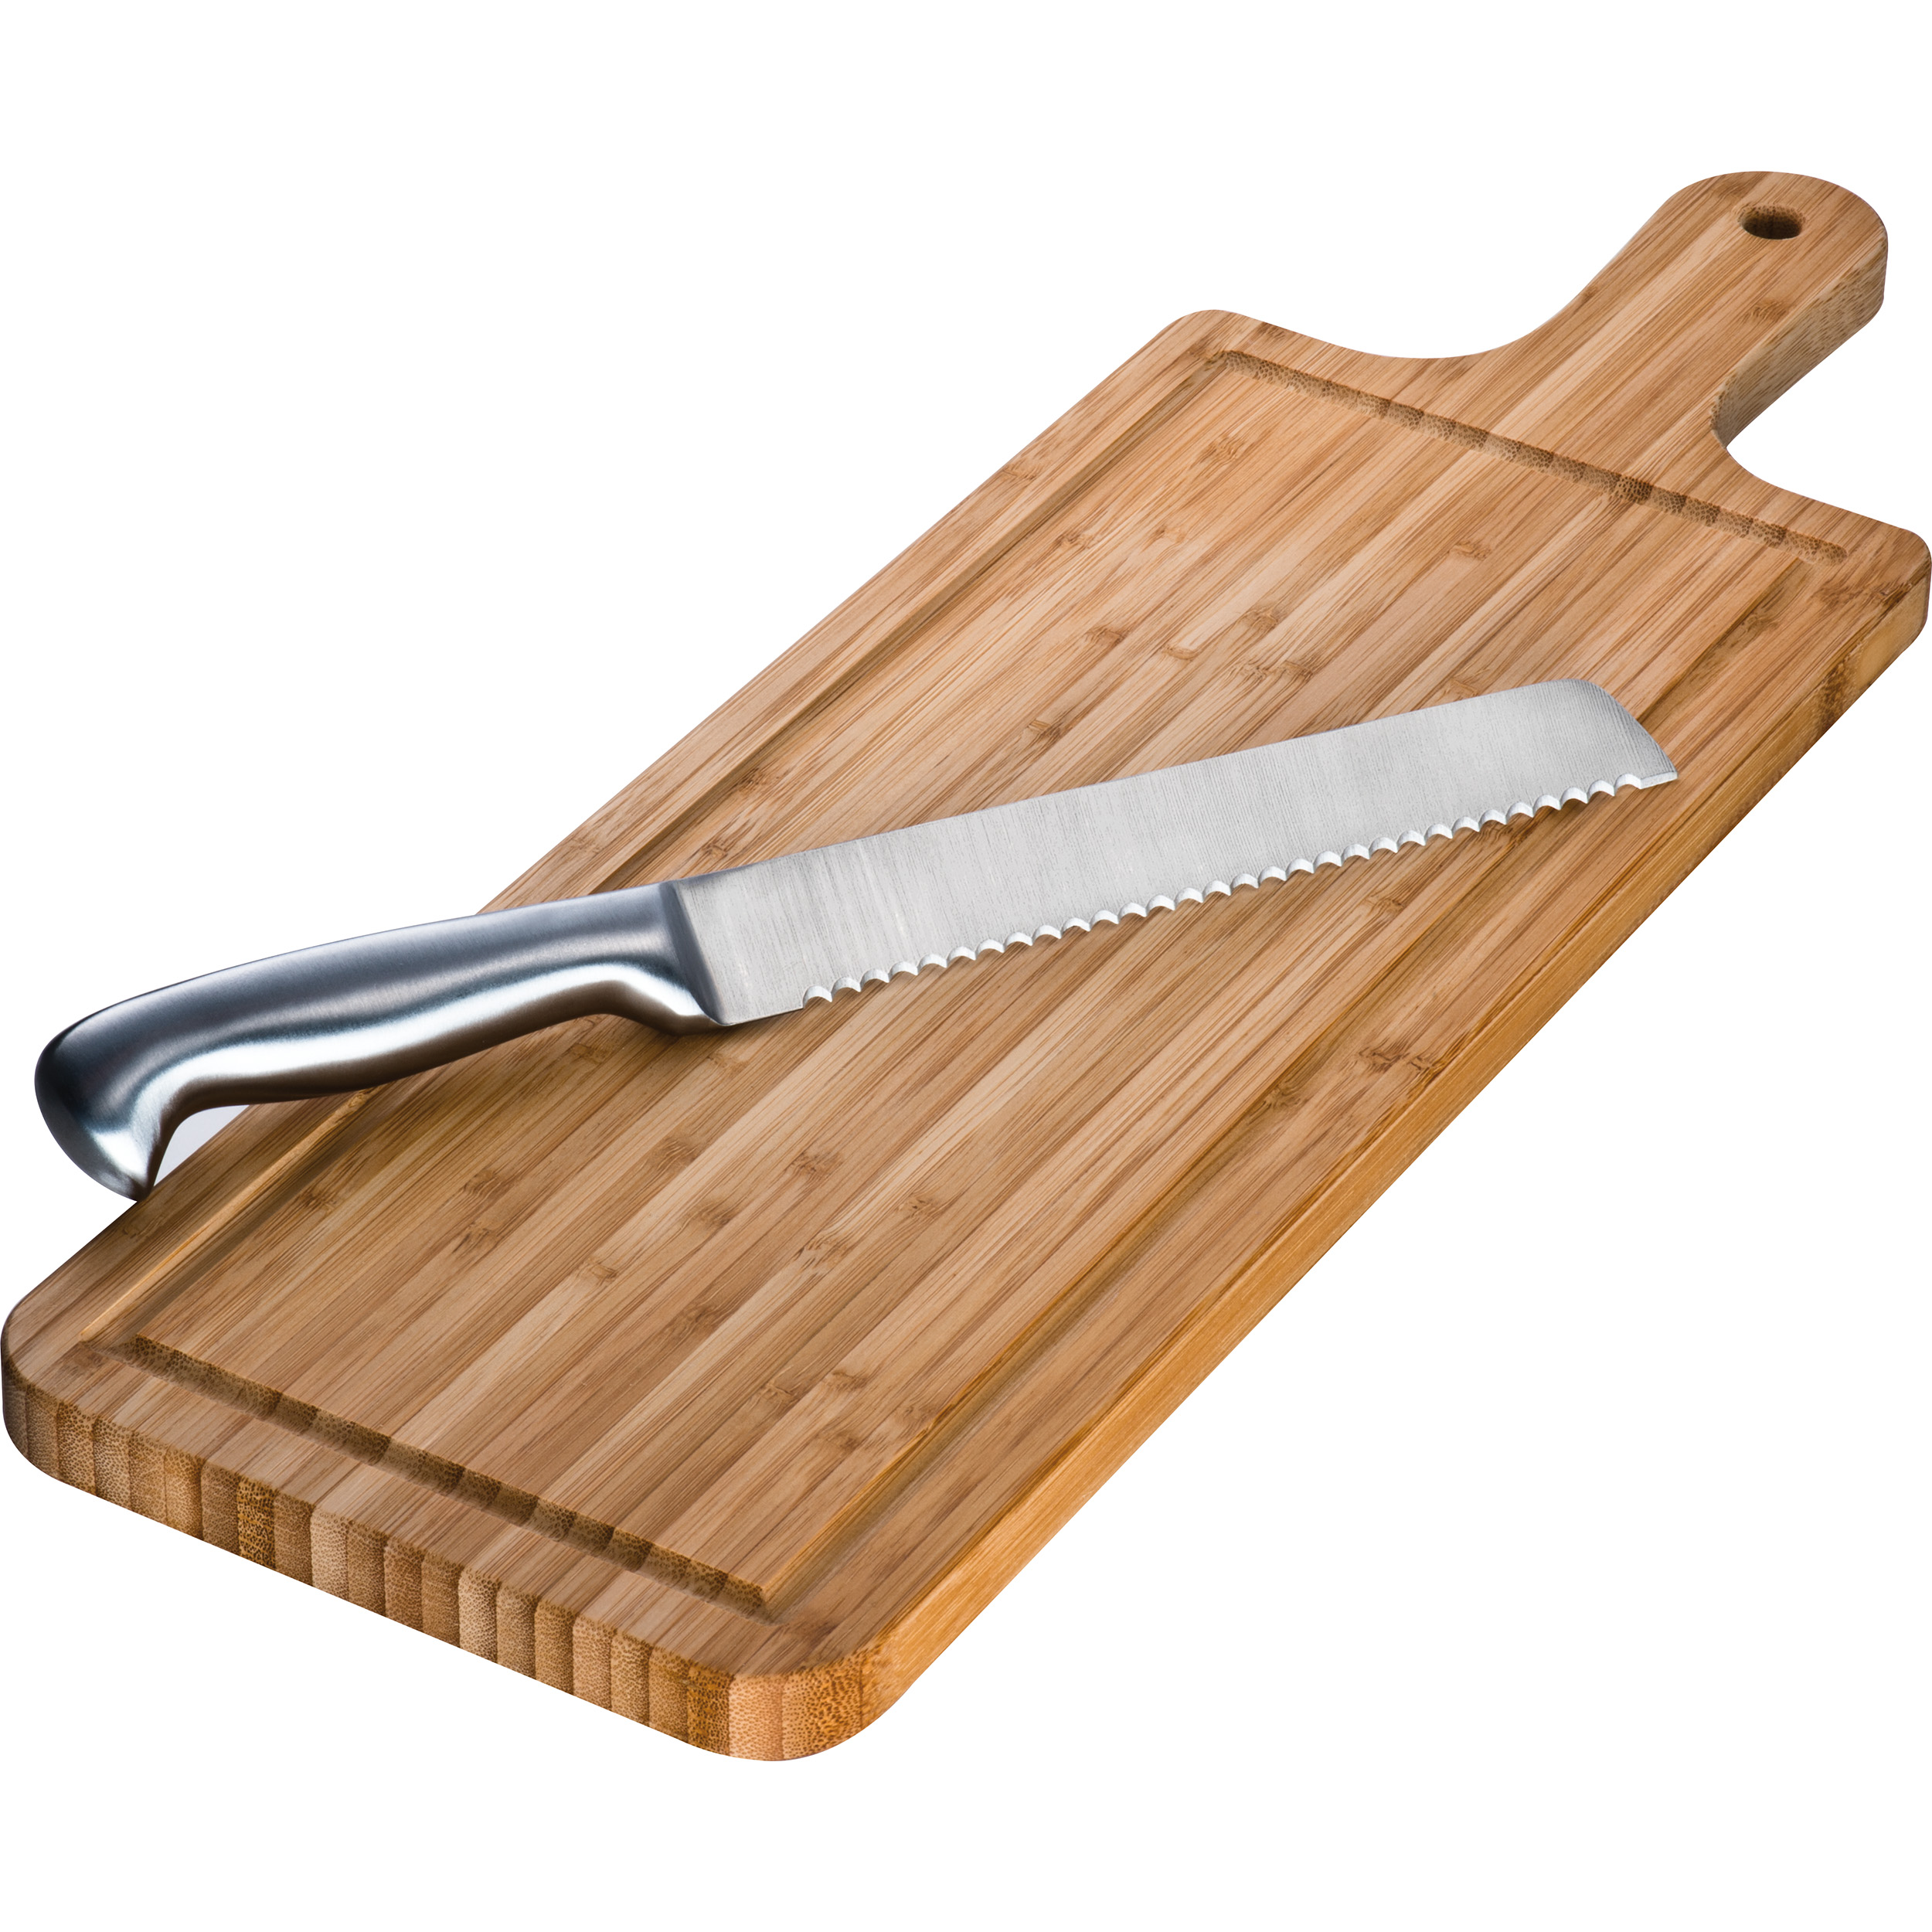 Bamboo chopping board with knife